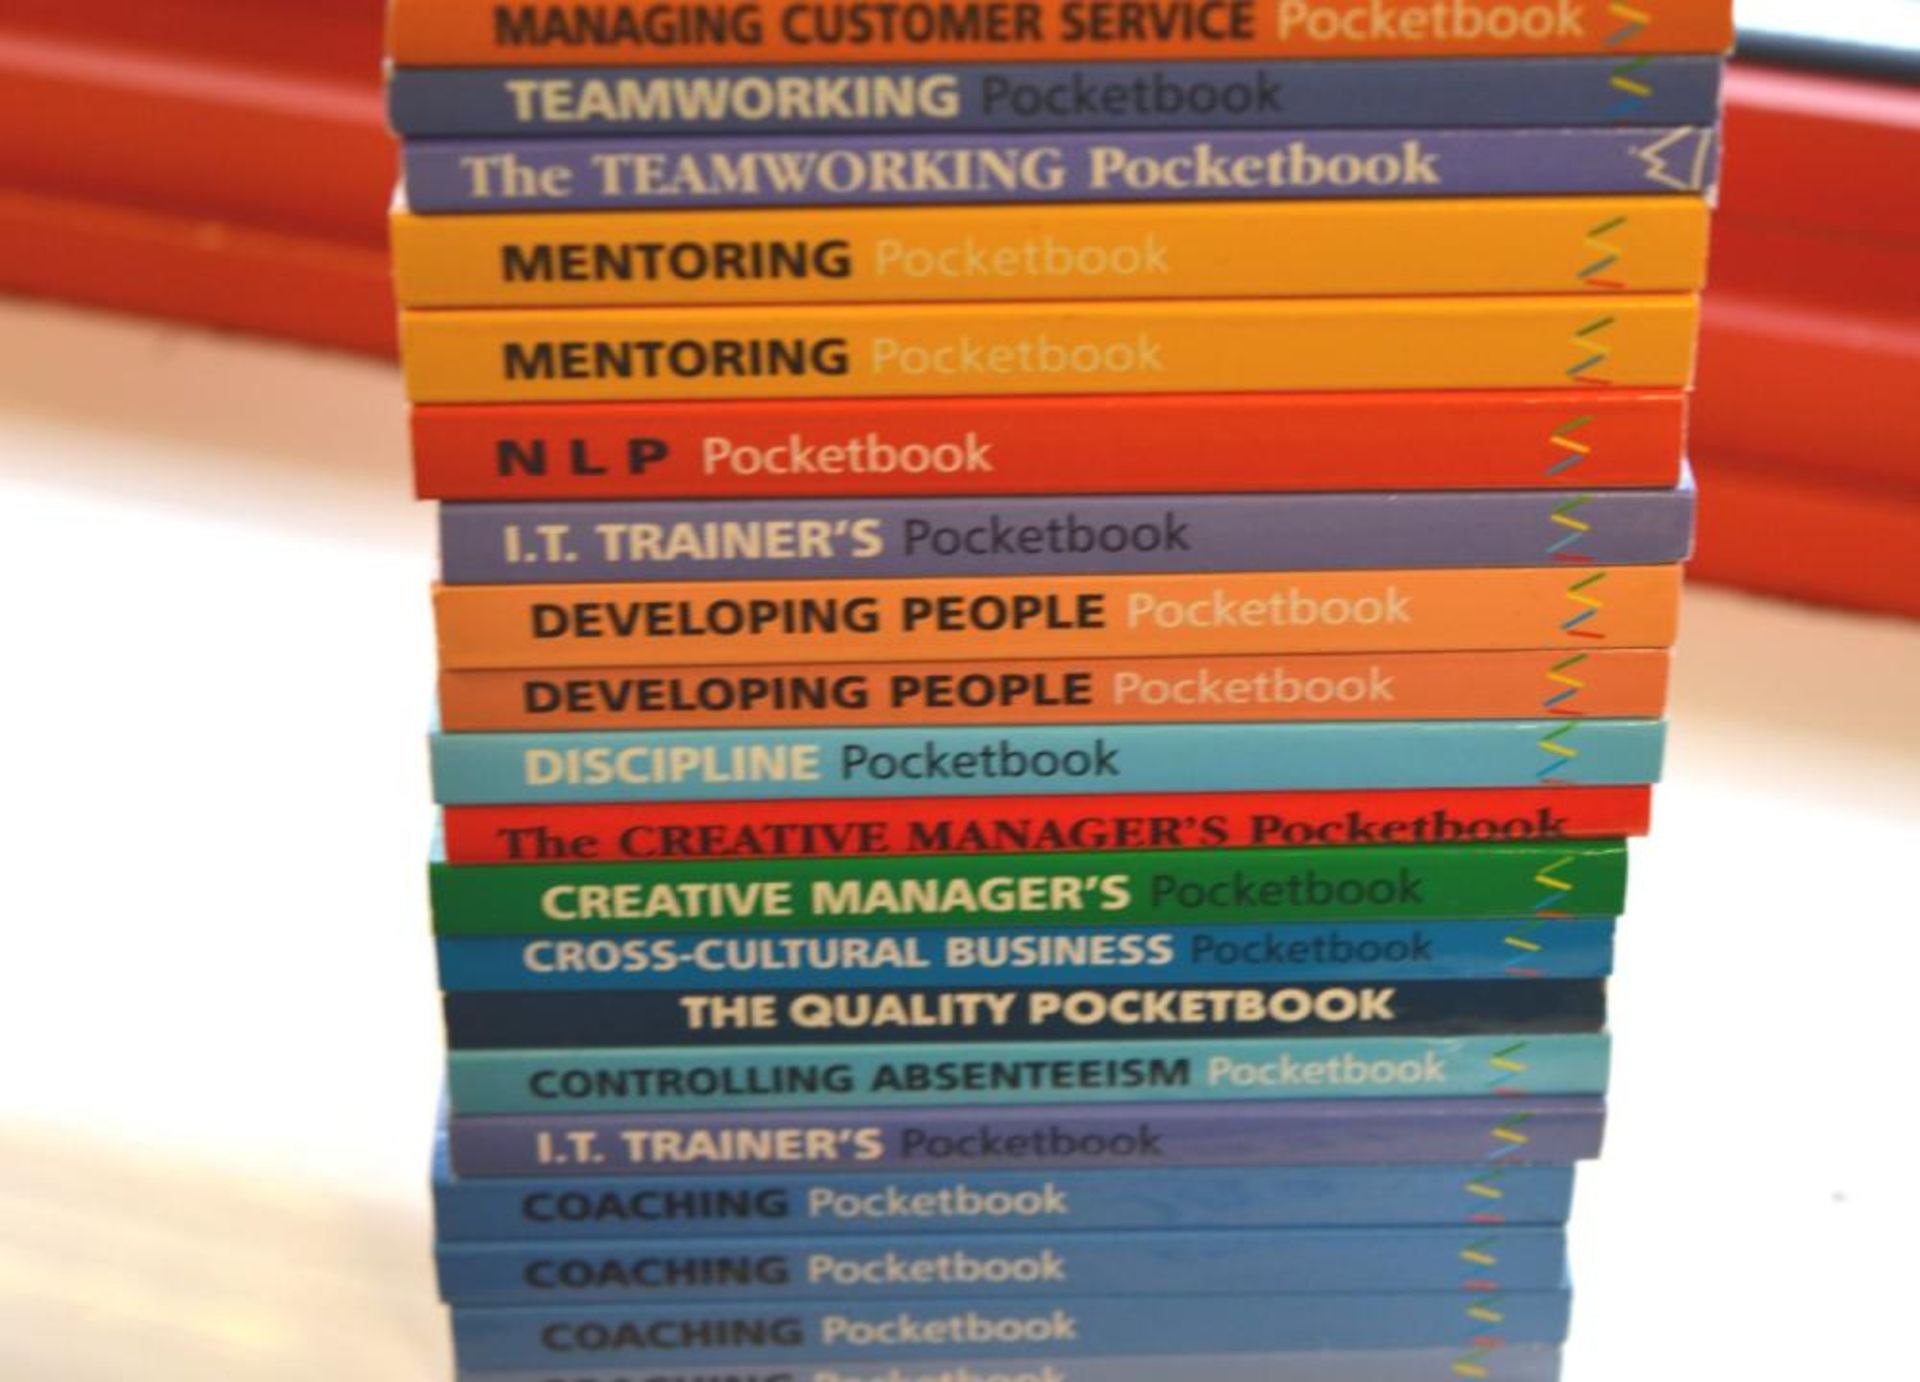 28 x Business Pocketbooks - Teamworking, Handling Complaints, Customer Service, IT Training and More - Image 6 of 8